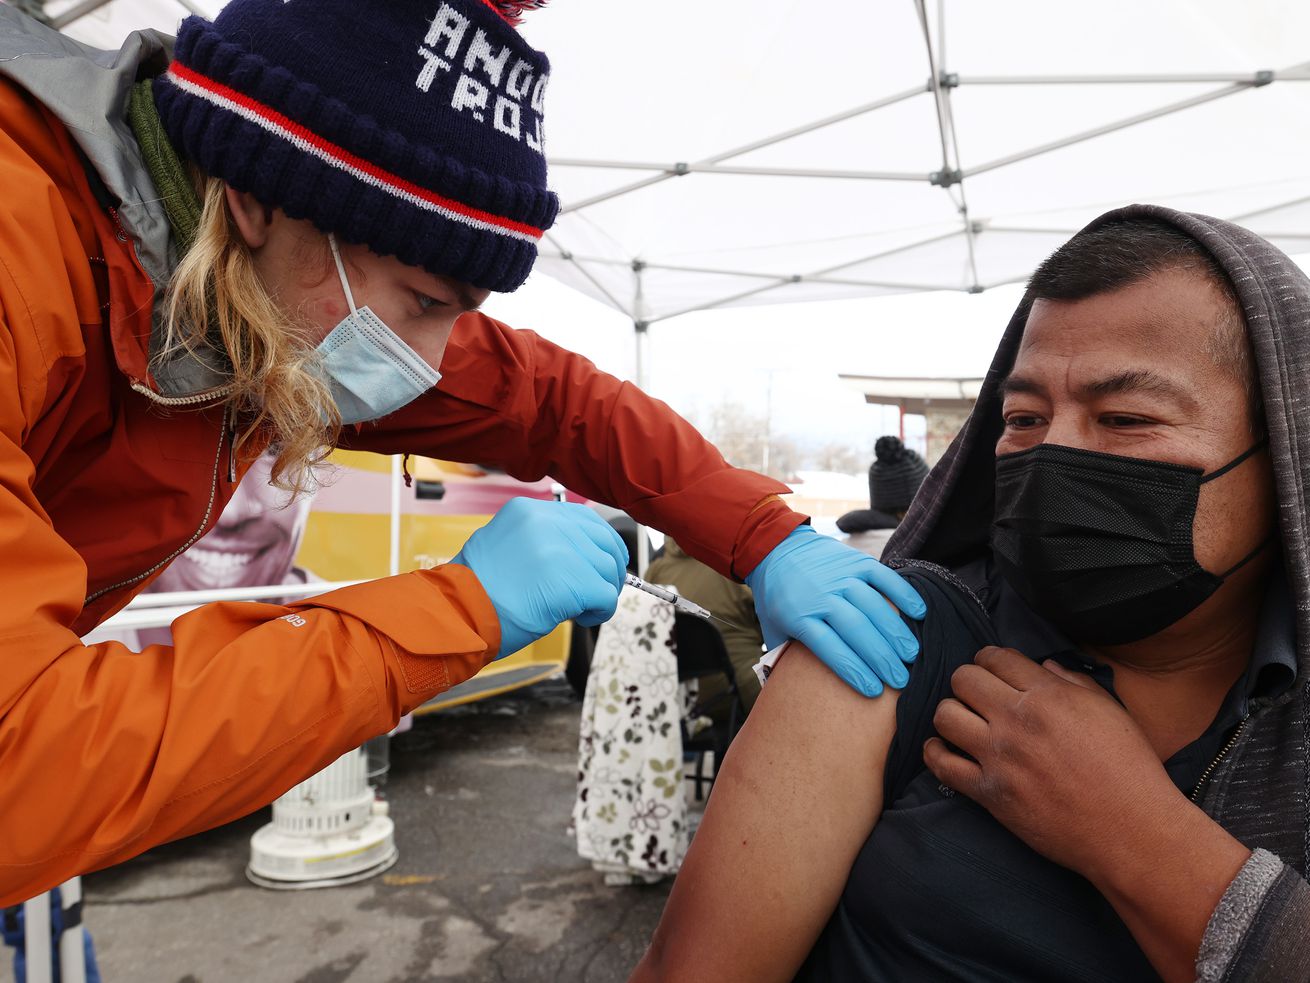 Tristin Torkelson, an EMT with Salt Lake County, gives Raymundo Altamirano a COVID-19 vaccination at a Salt Lake County Health Department mobile site at Tejeda’s Market in Salt Lake City on Wednesday, Dec. 29, 2021.